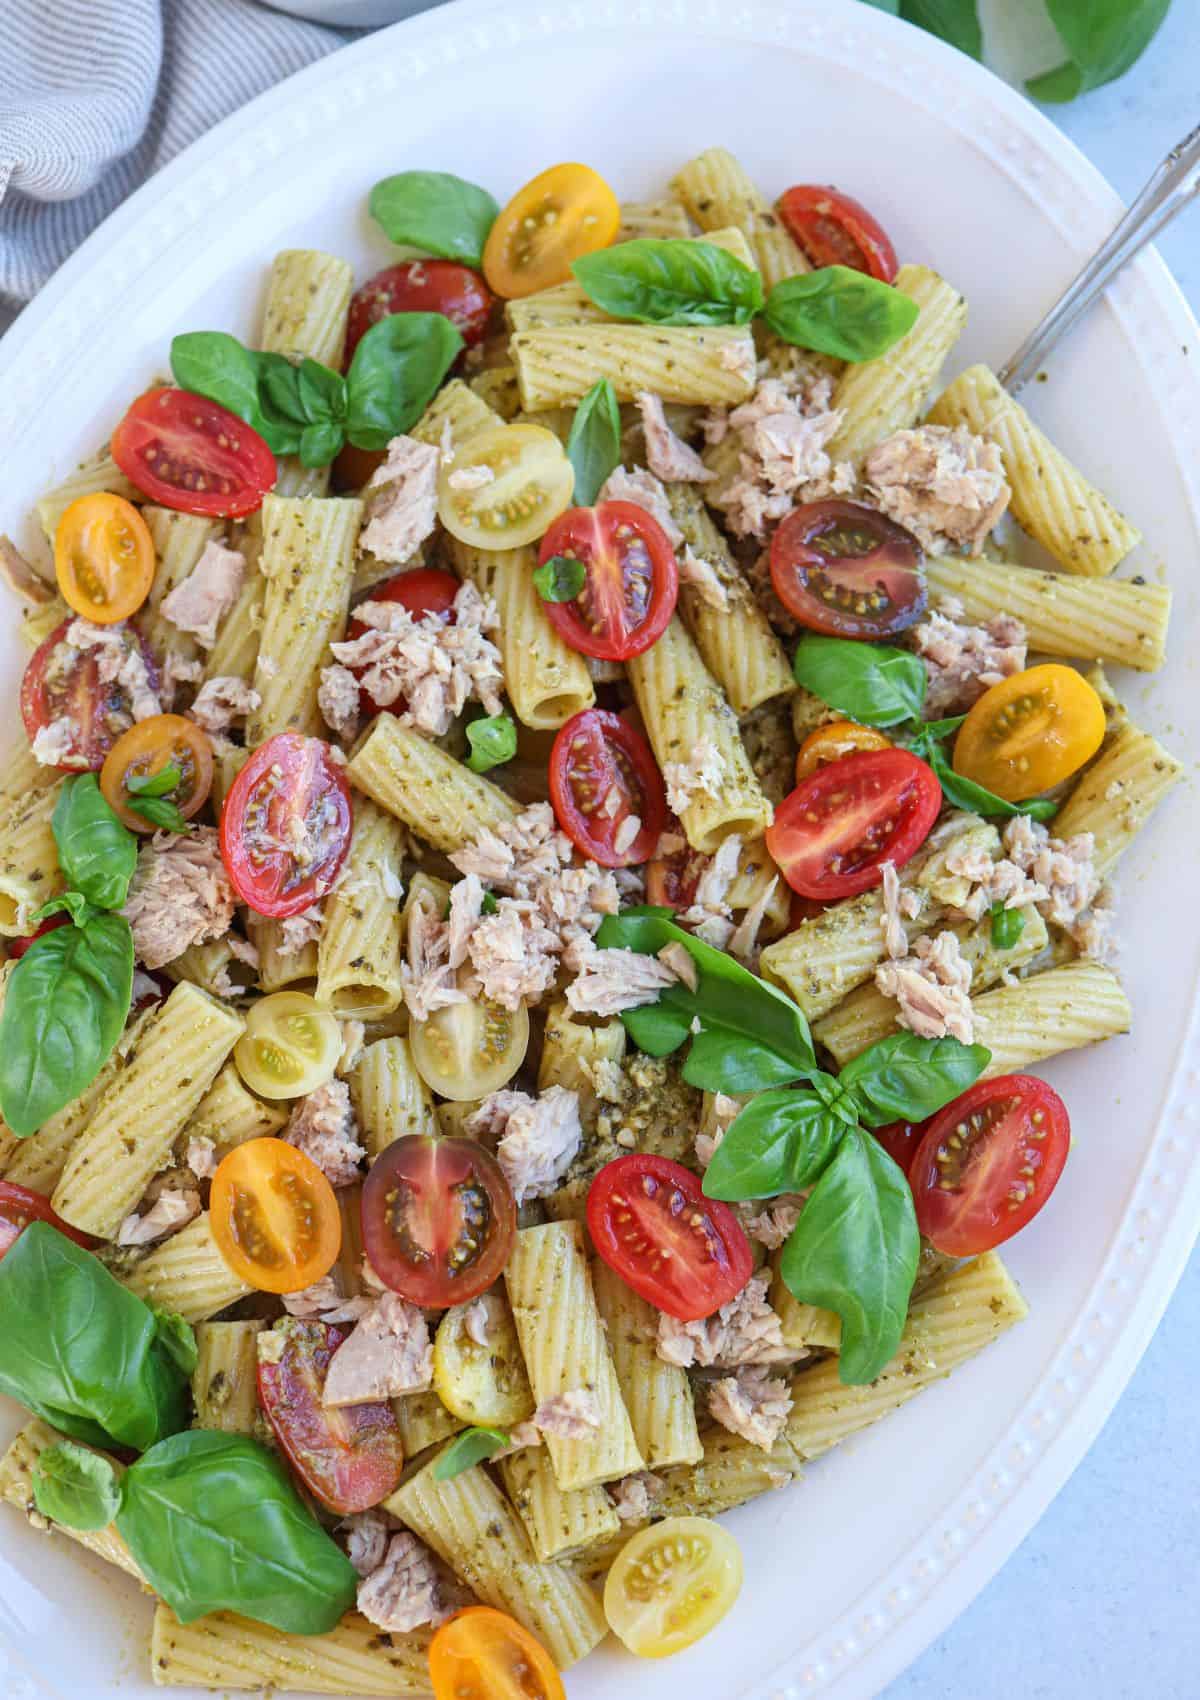 pesto tuna pasta with cherry tomatoes, tuna and fresh basil leaves on an oval white platter.